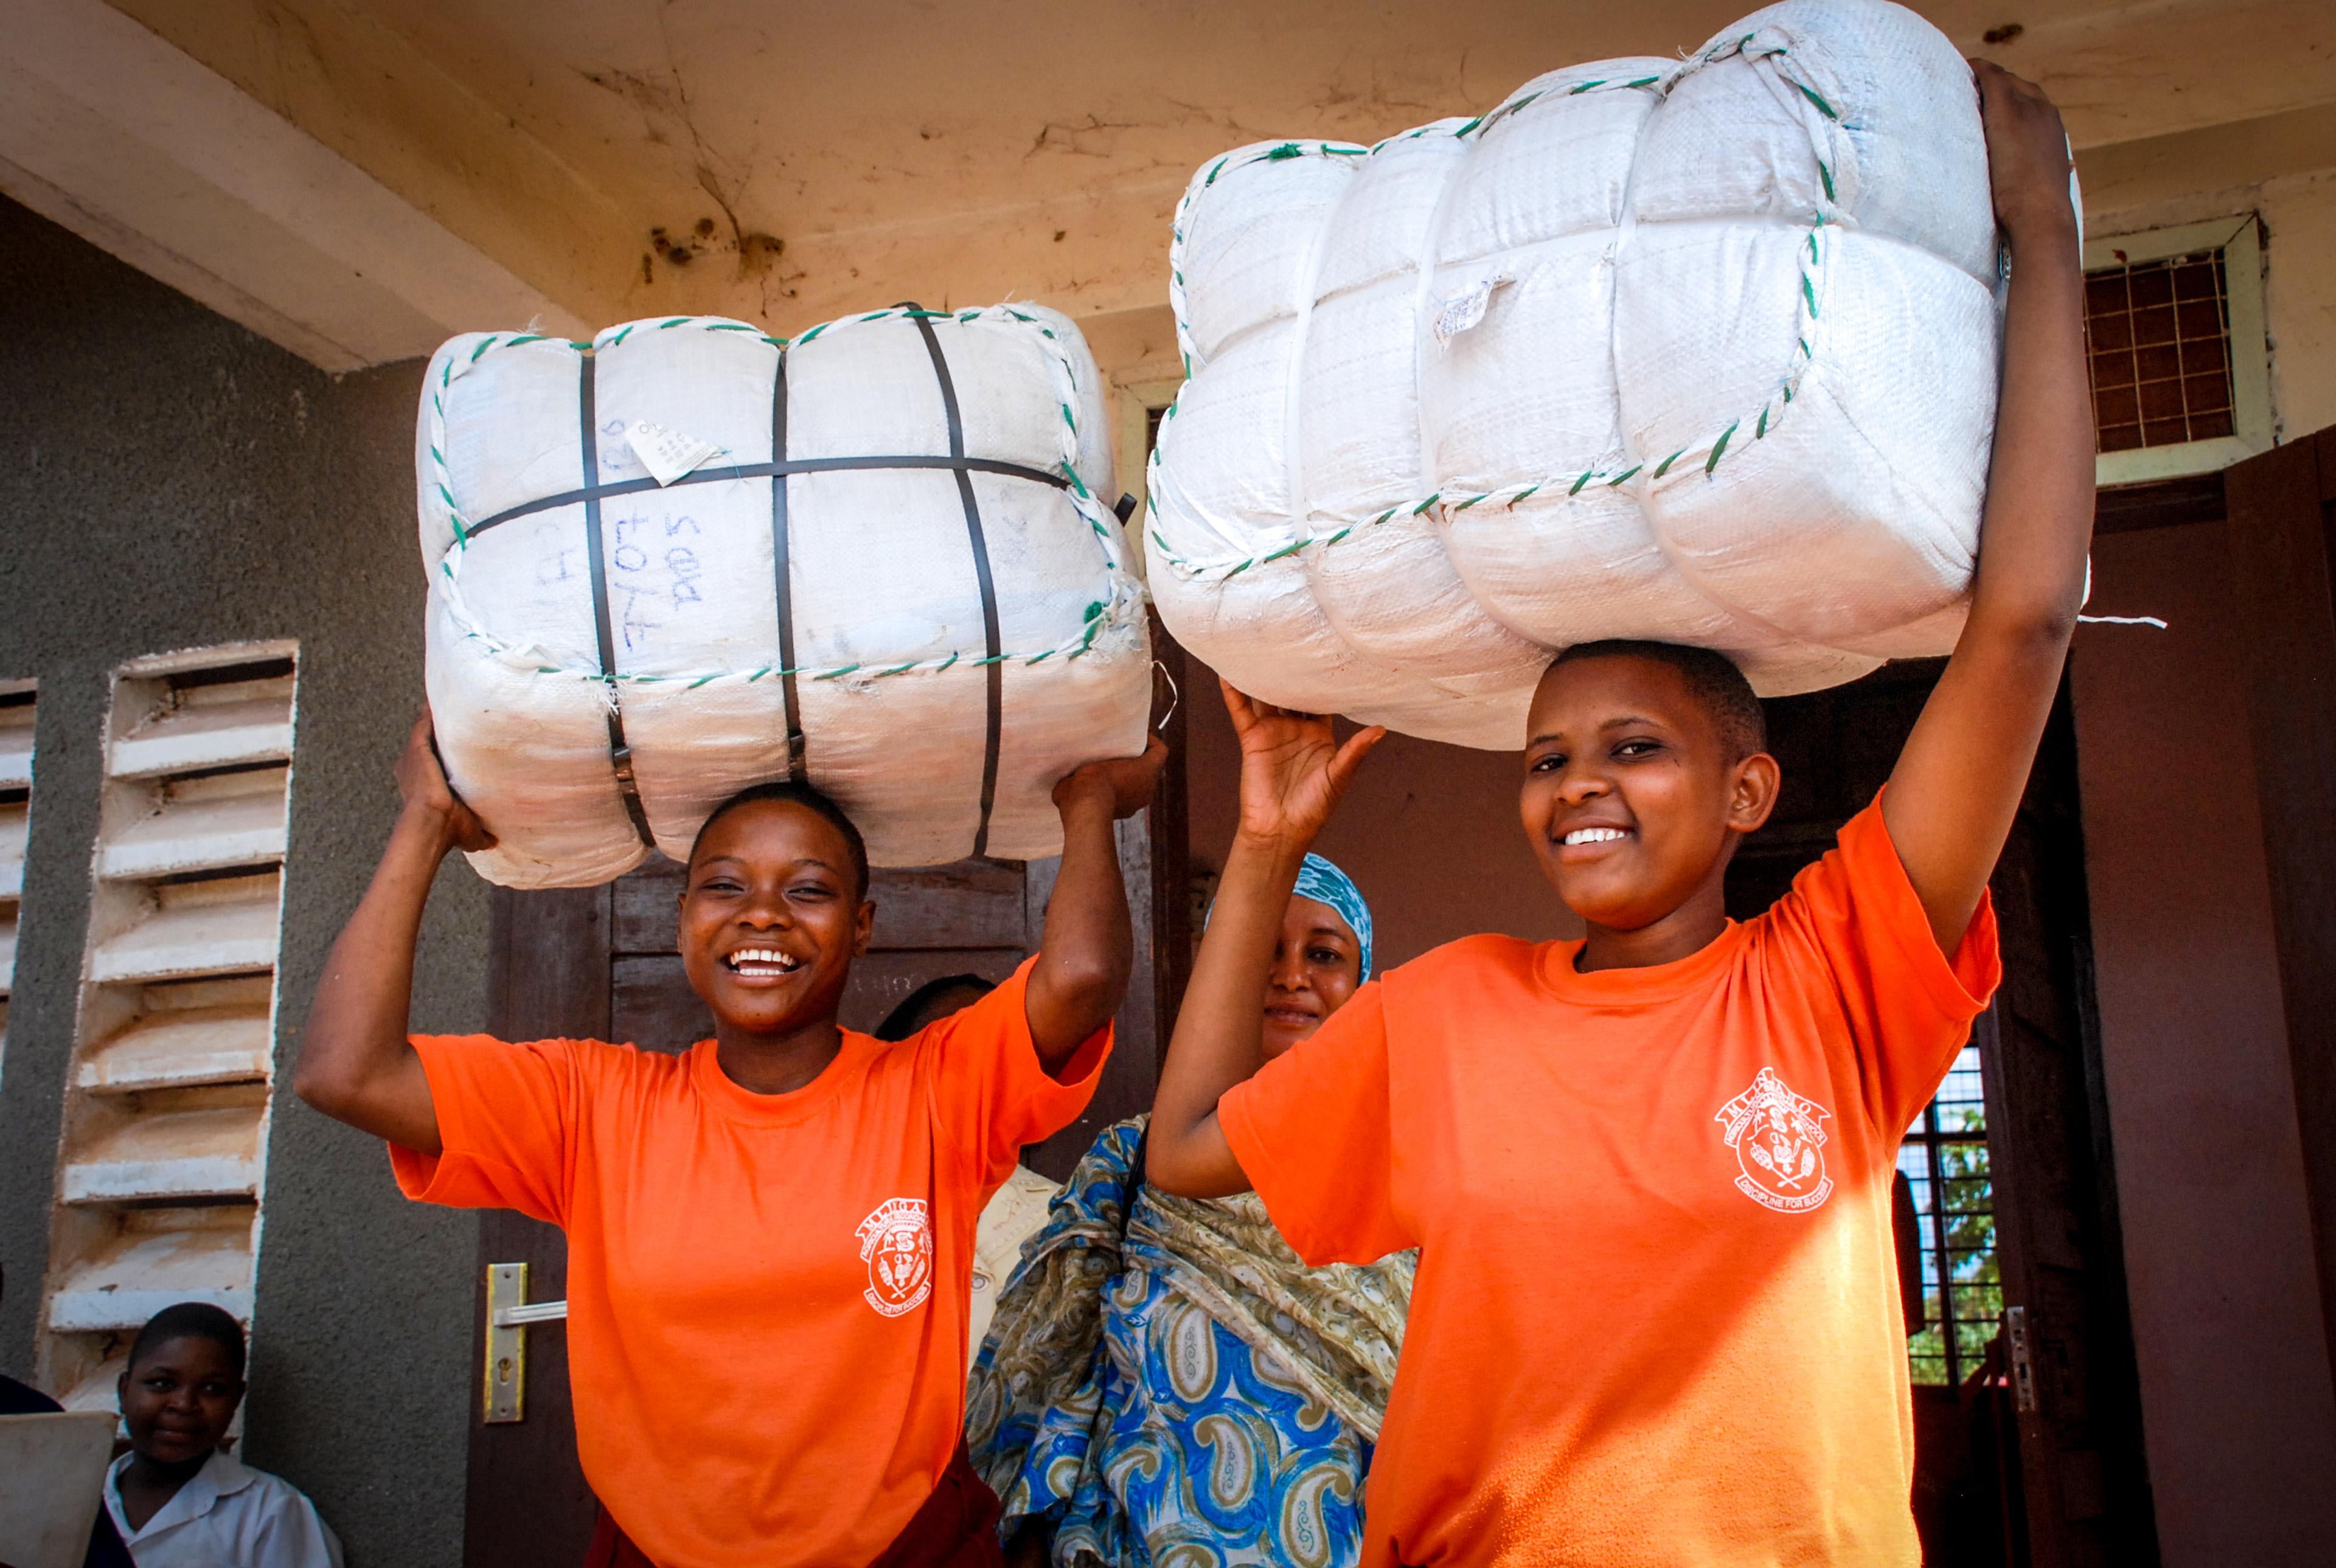 Women in Uganda holding bales of insecticide-treated bednets provided by the Against Malaria Foundation, one of Giving What We Can